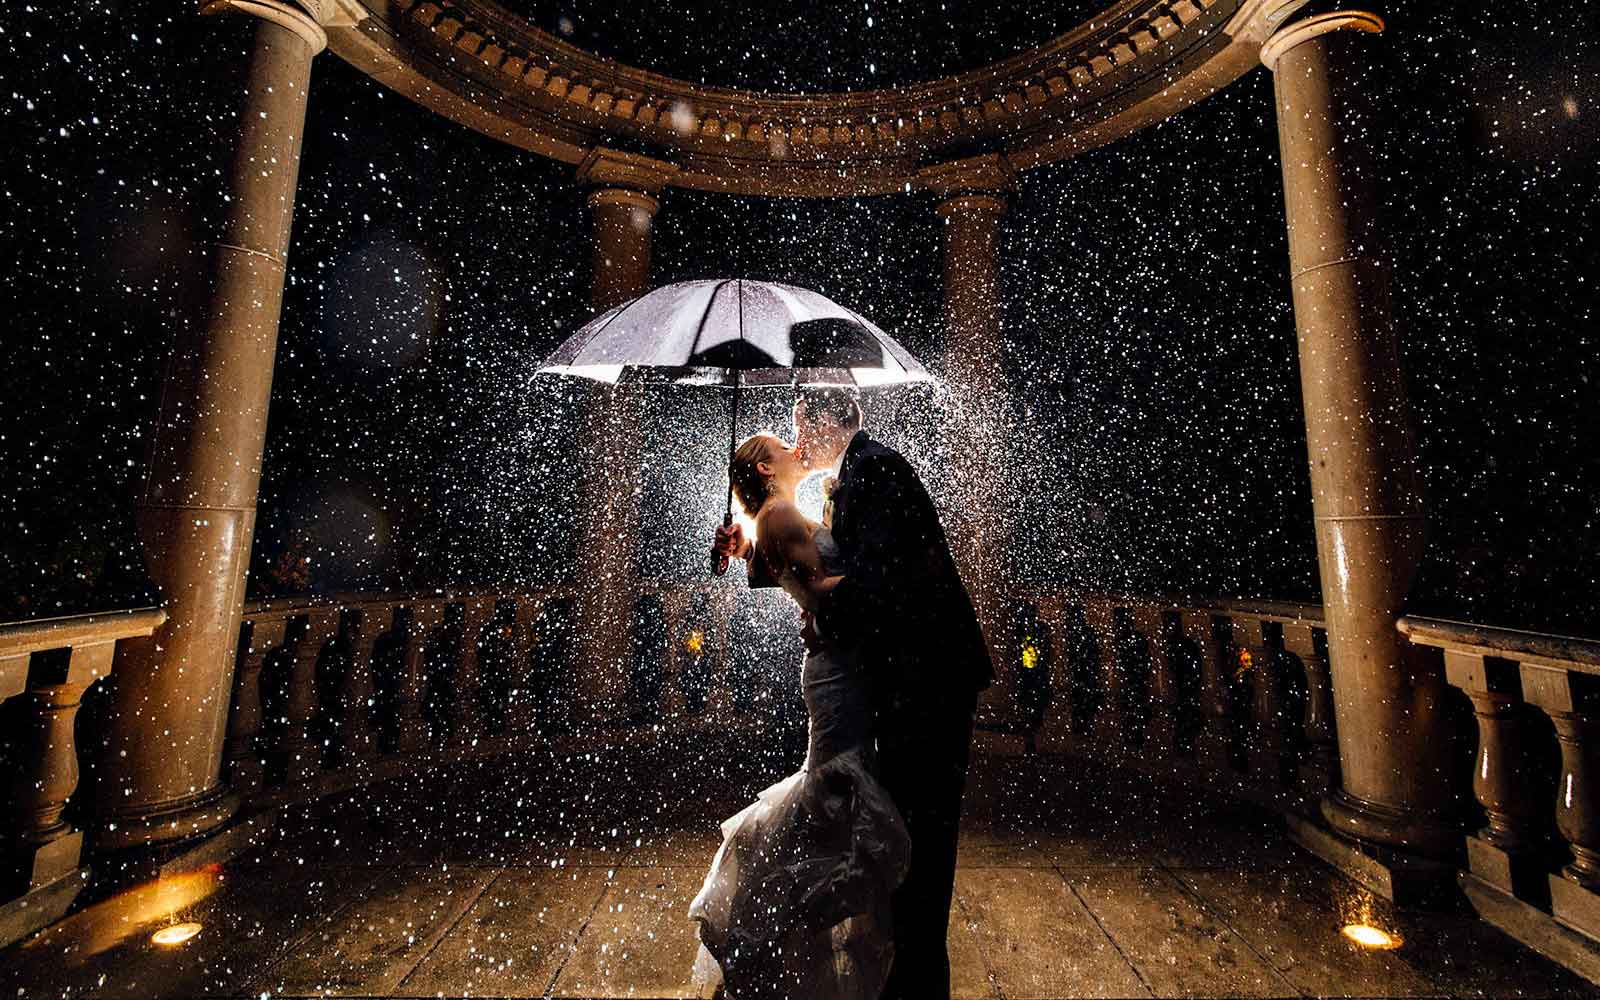 Couple kissing in the rain